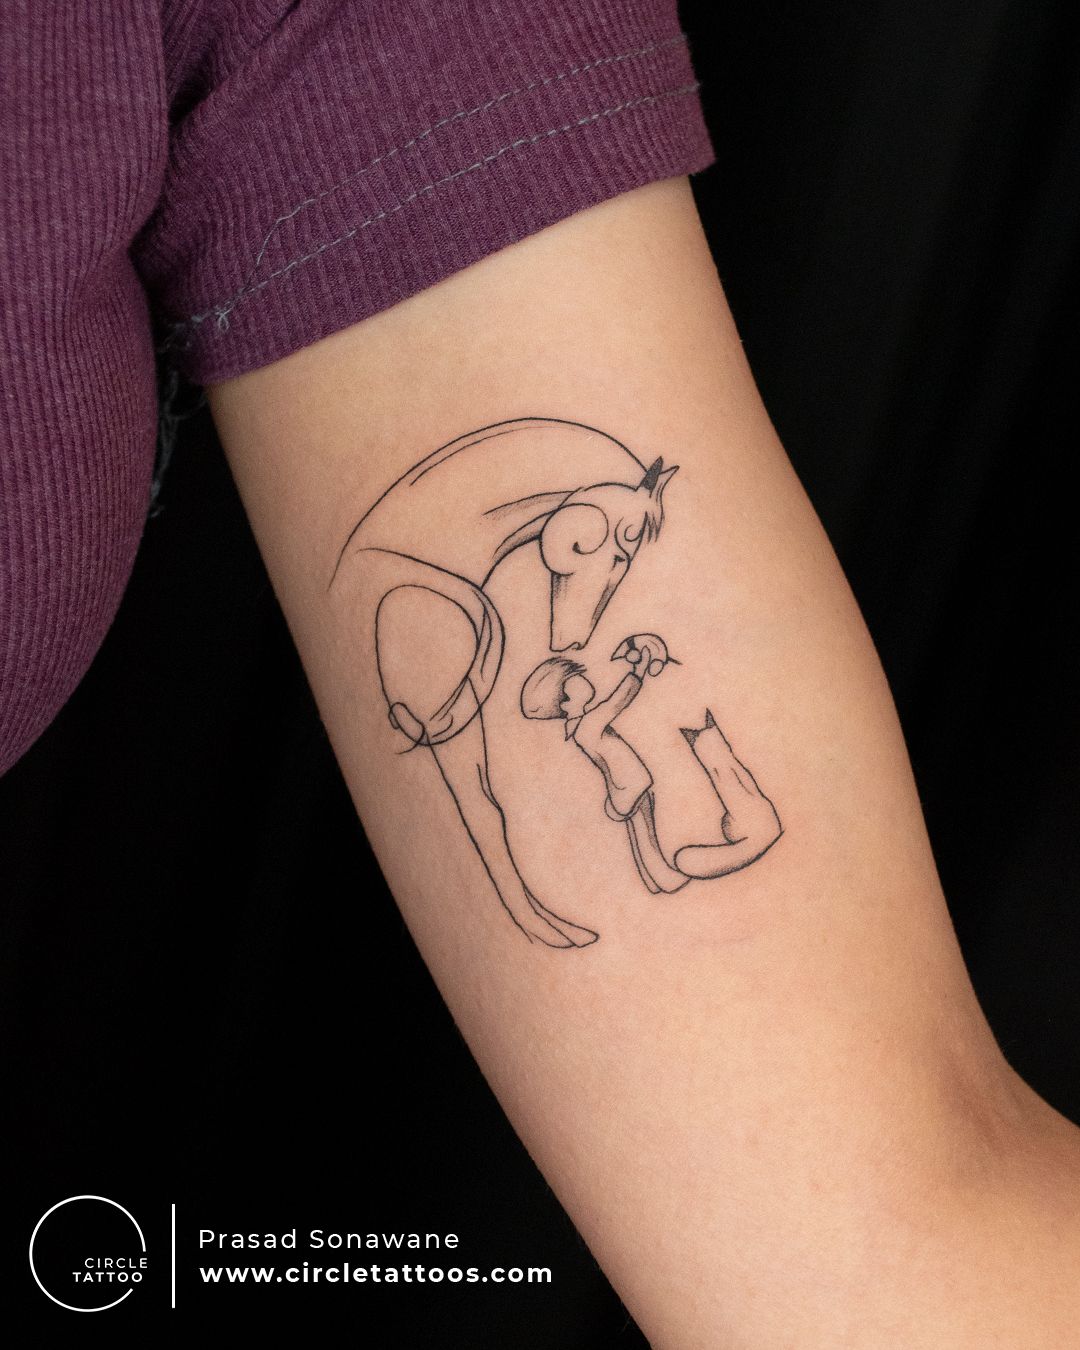 Single line horse for all our equestrians out there by natasalazarbook    RedInk Tattoo Studio 315 West 54th Street New York New  Instagram